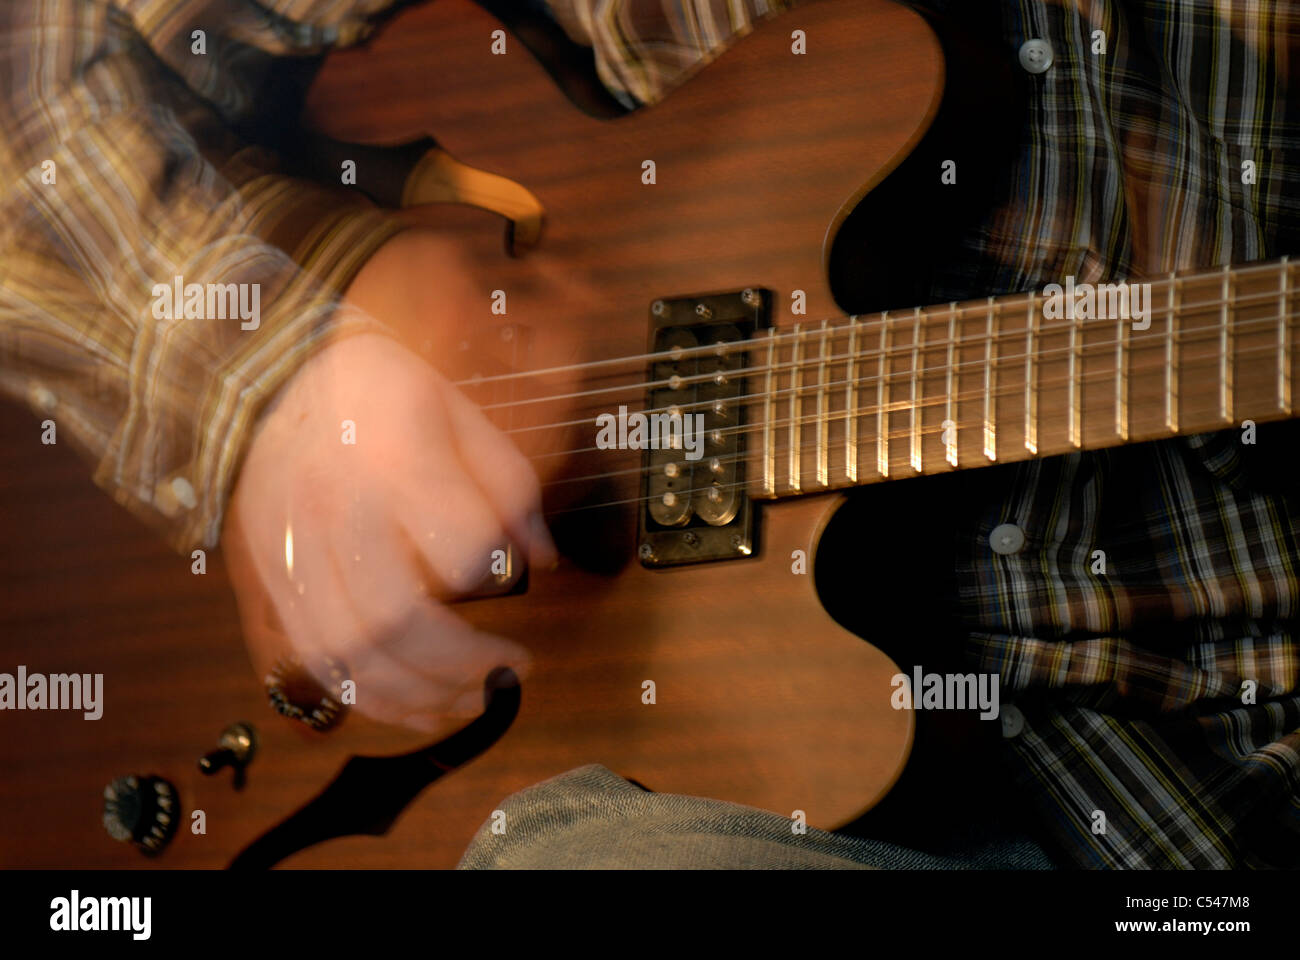 A hollow body electric guitar being strummed, with motion blur Stock Photo